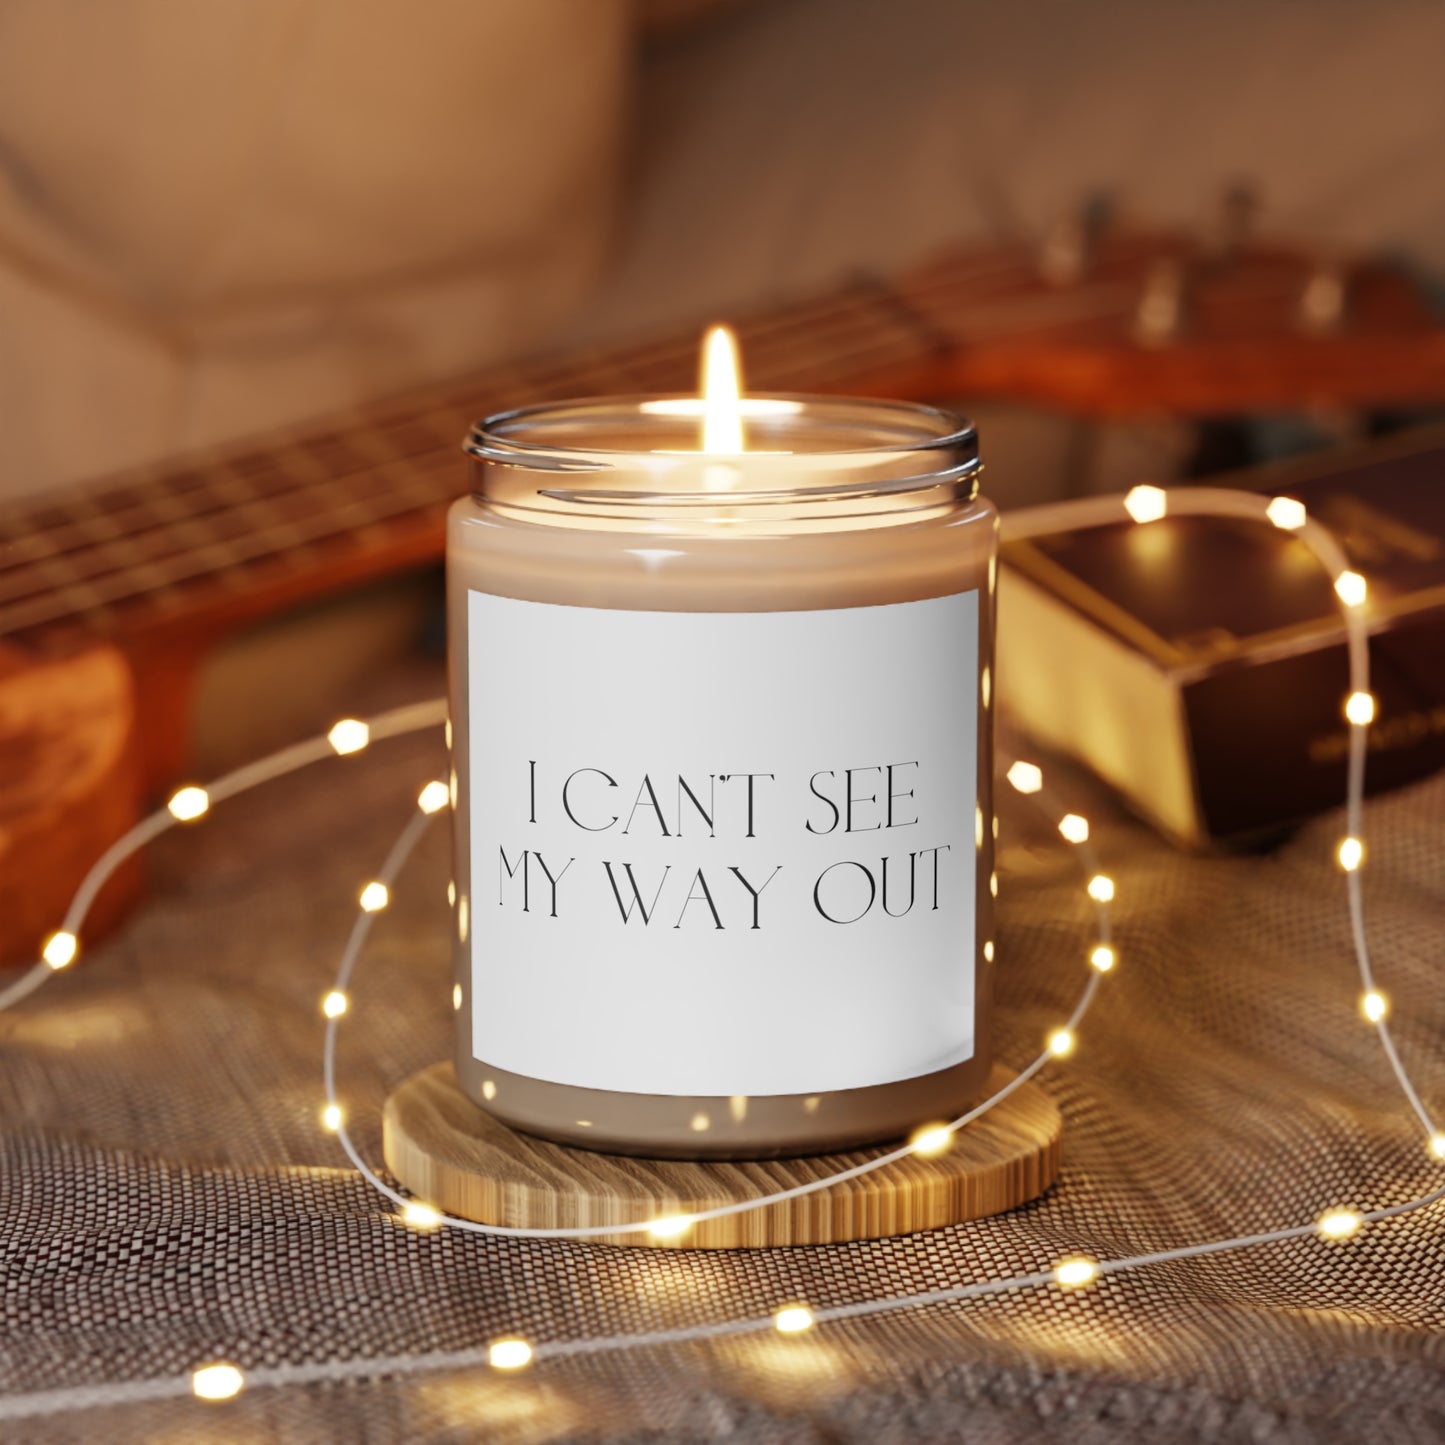 'I can't see my way out' - scented candle